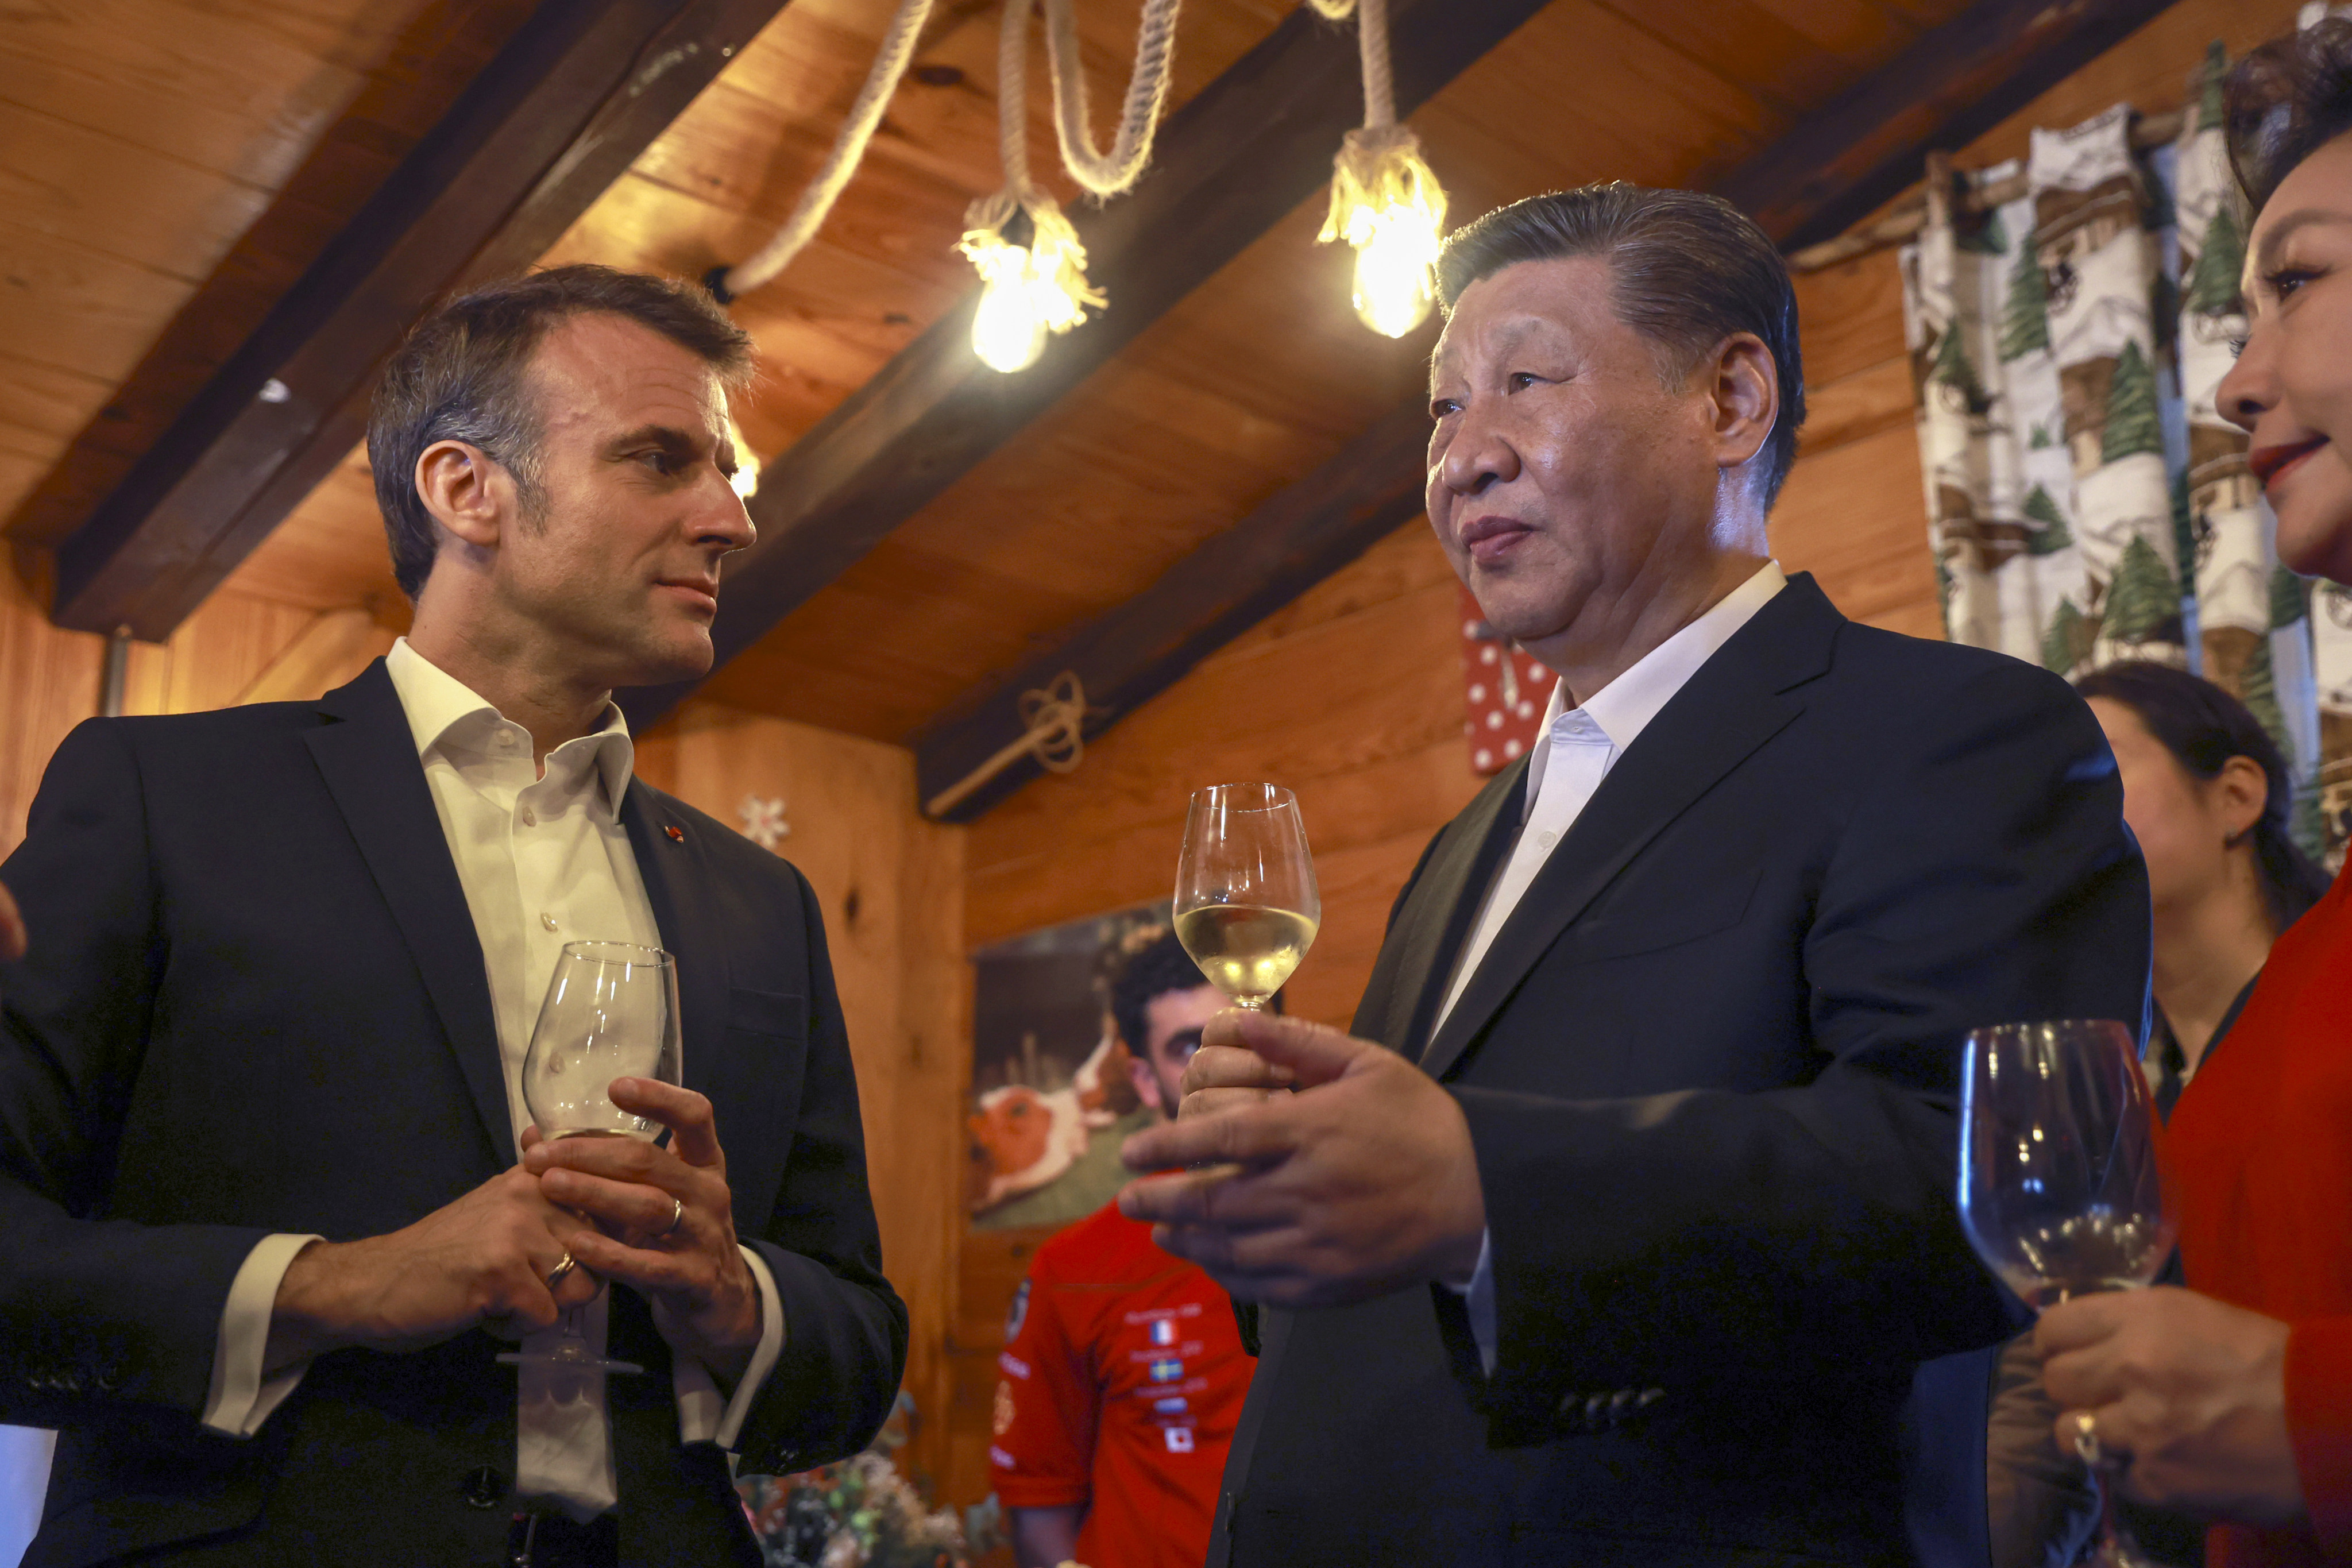 Chinese President Xi Jinping with his host and counterpart Emmanuel Macron at a restaurant in the Pyrenees mountains on Tuesday. Photo: AP